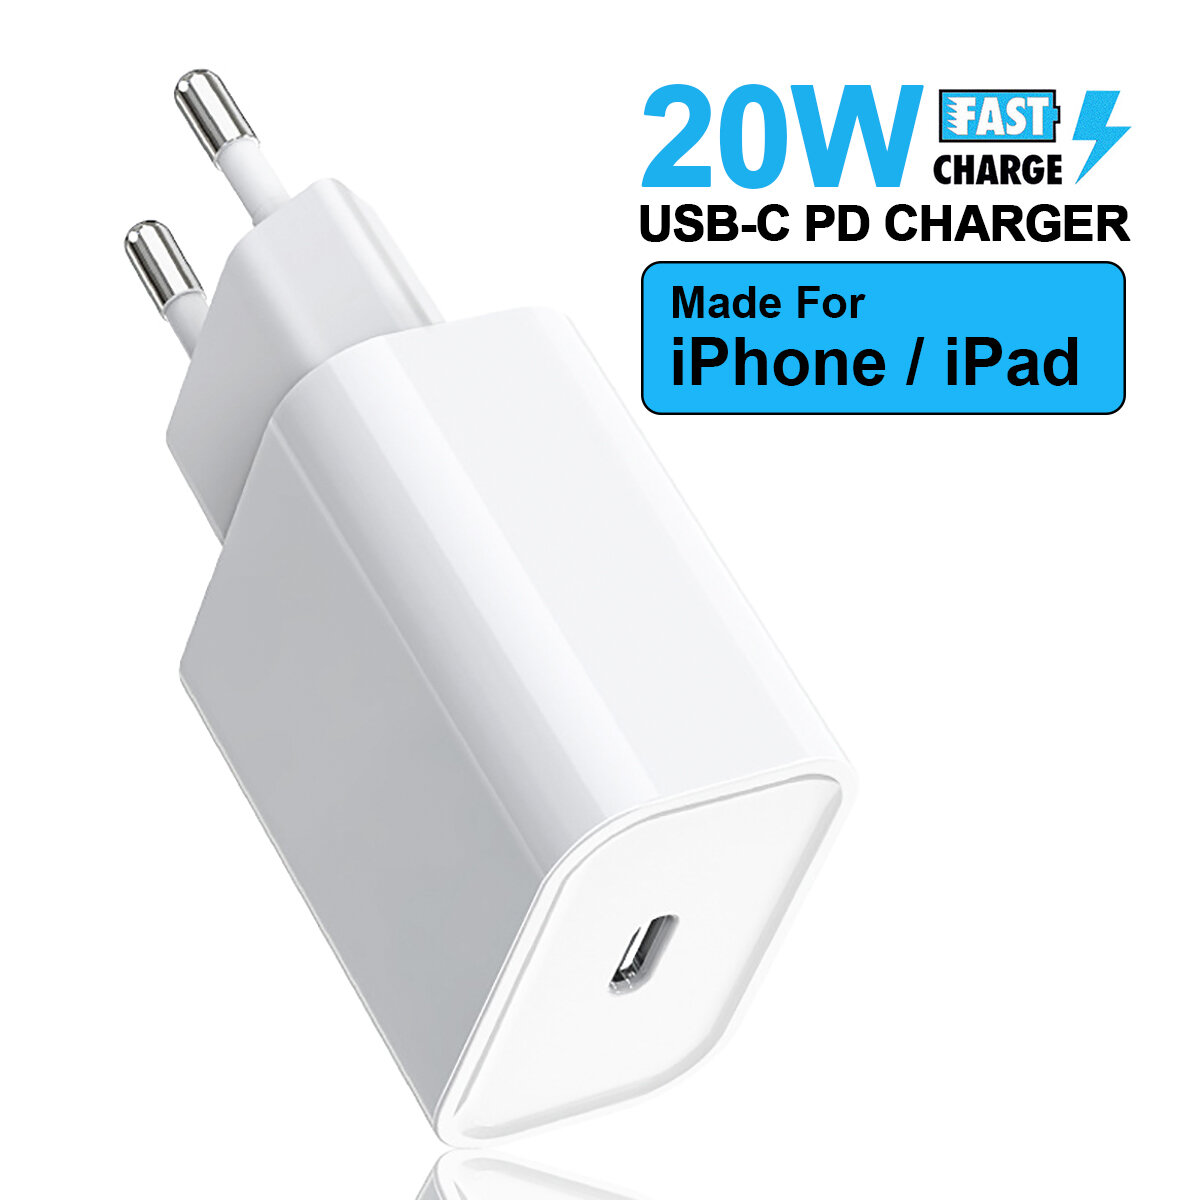 

Bakeey PD 20W USB C Charger Travel Charger Adapter Fast Charging For iPhone 12 Pro Max Mini OnePlus 8Pro 8T